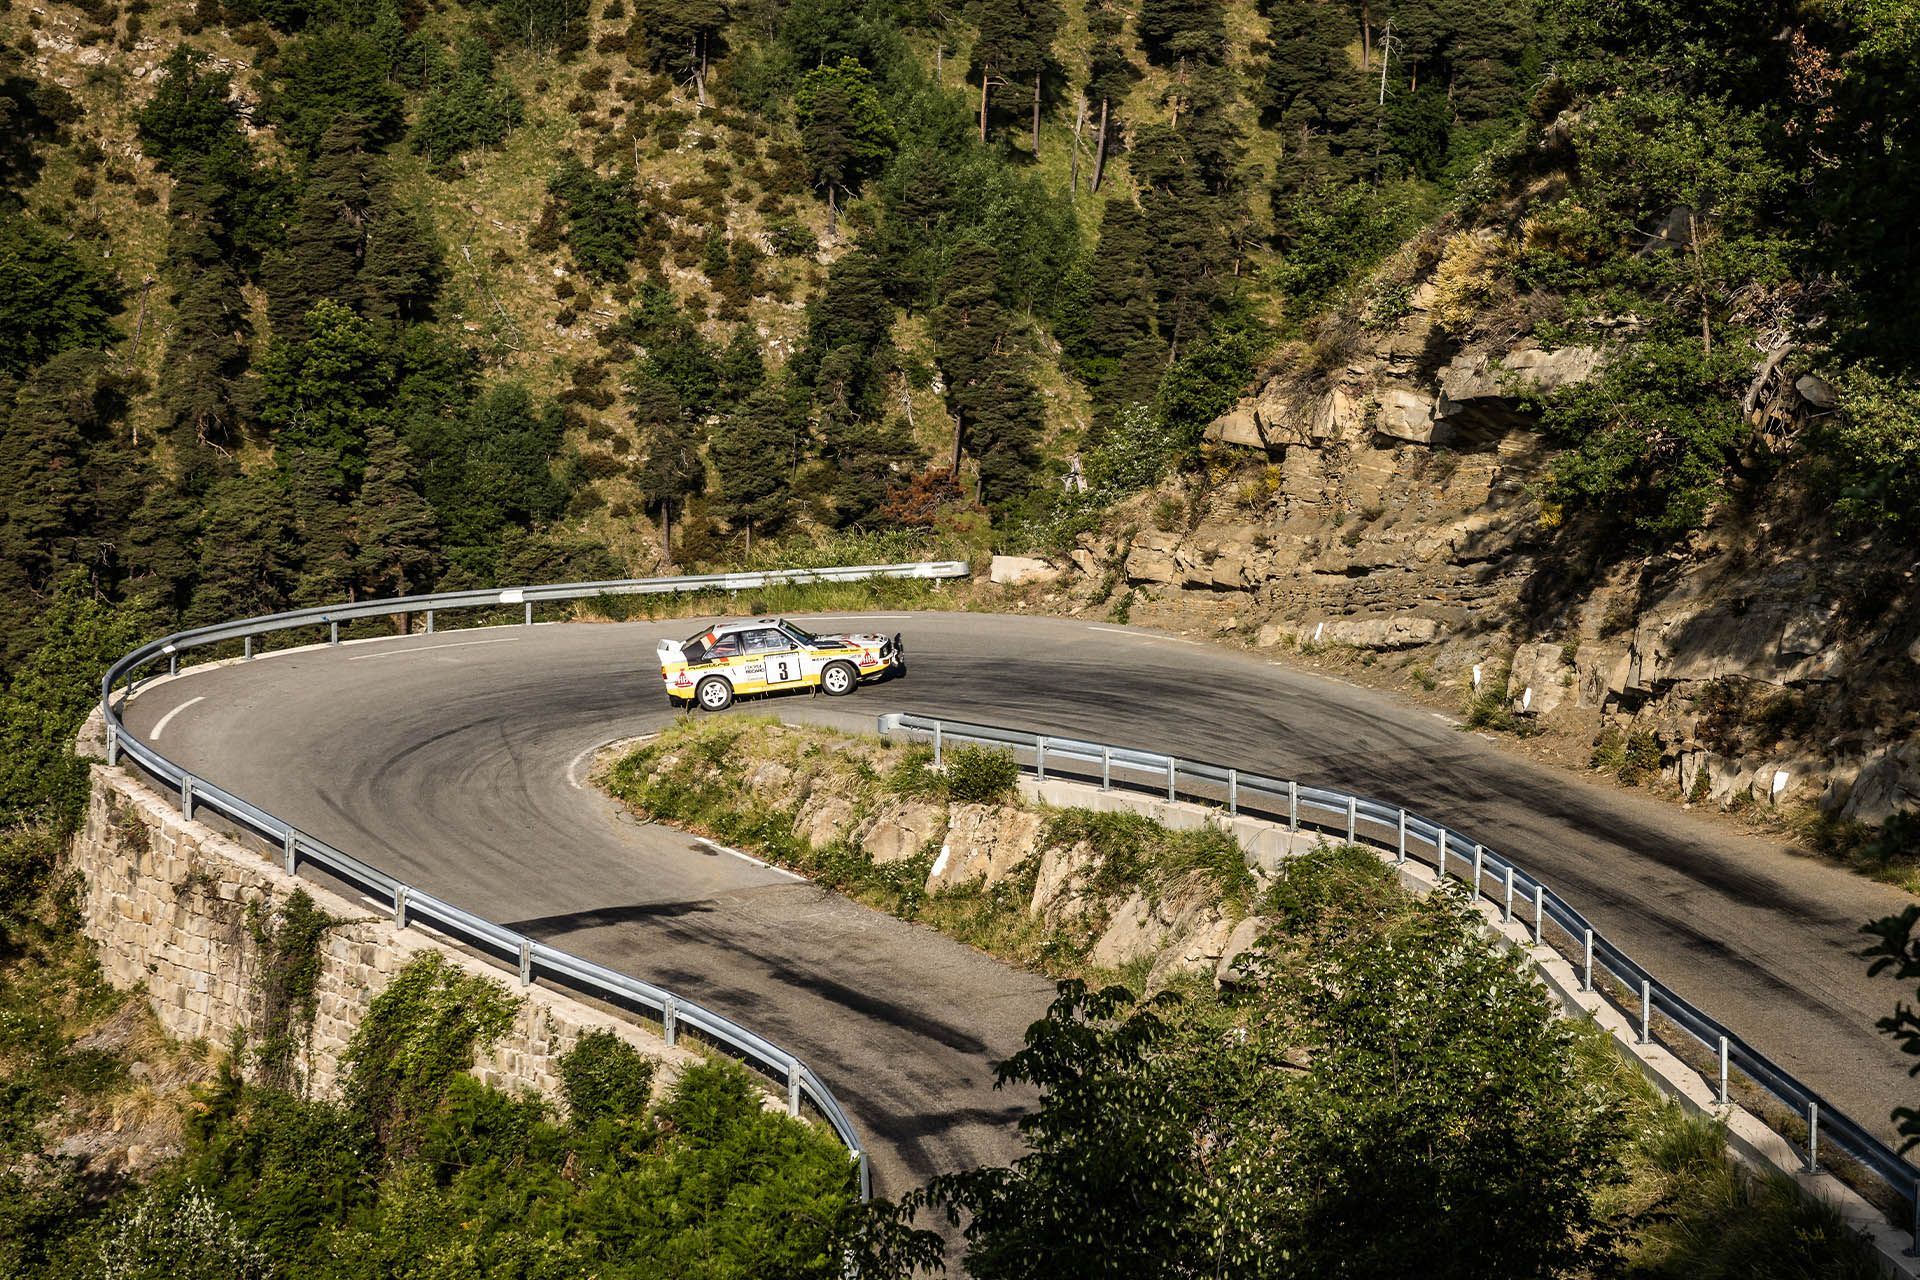 Audi Sport quattro S1 at the Col de Turini. Closed track, professional driver. Don’t try this at home.